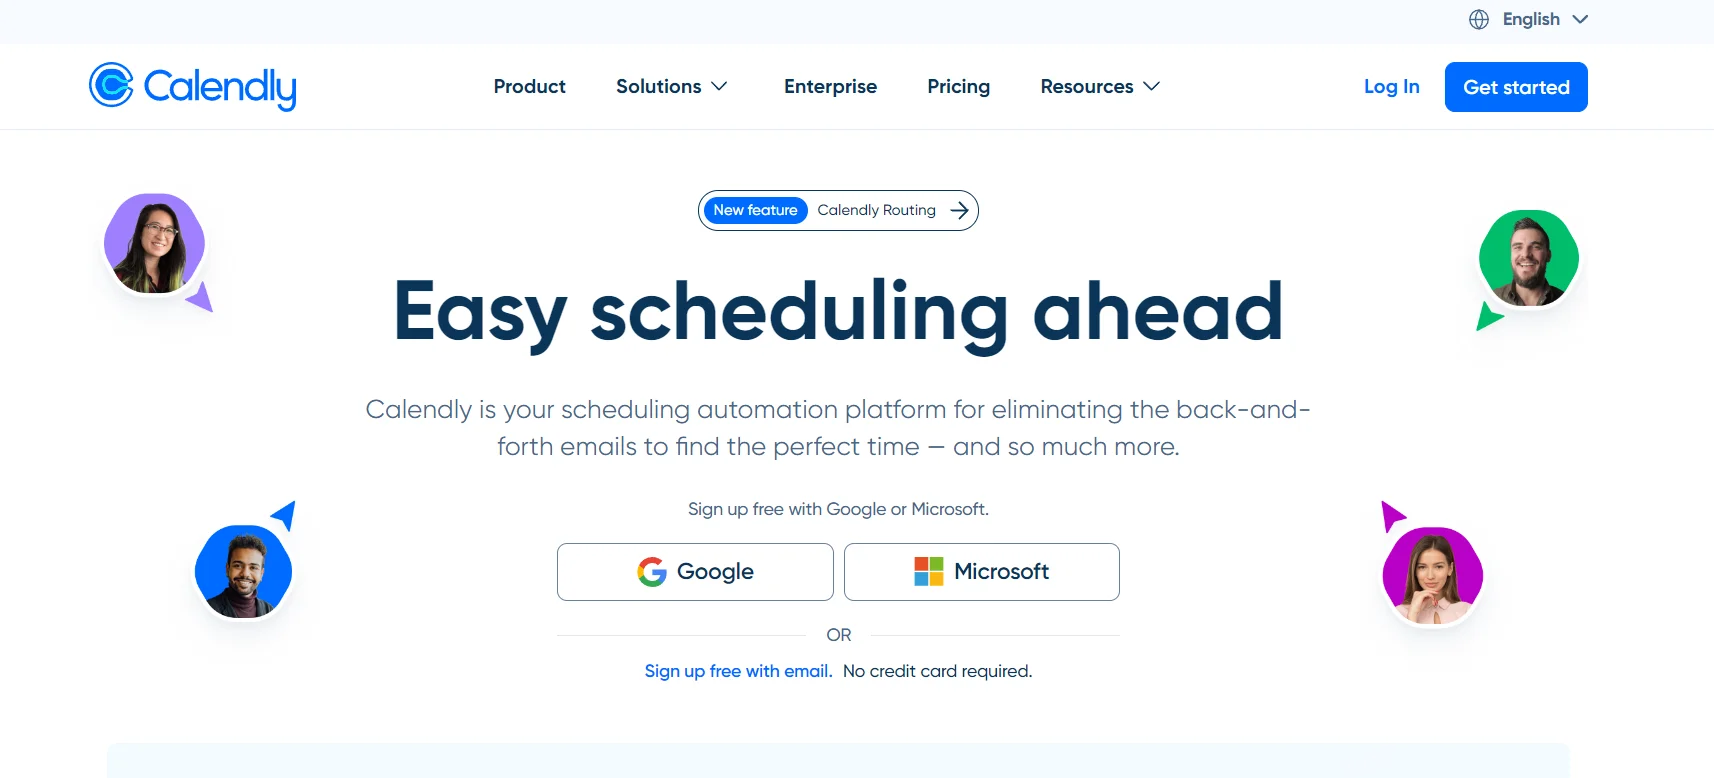 Calendly- Employee scheduling software